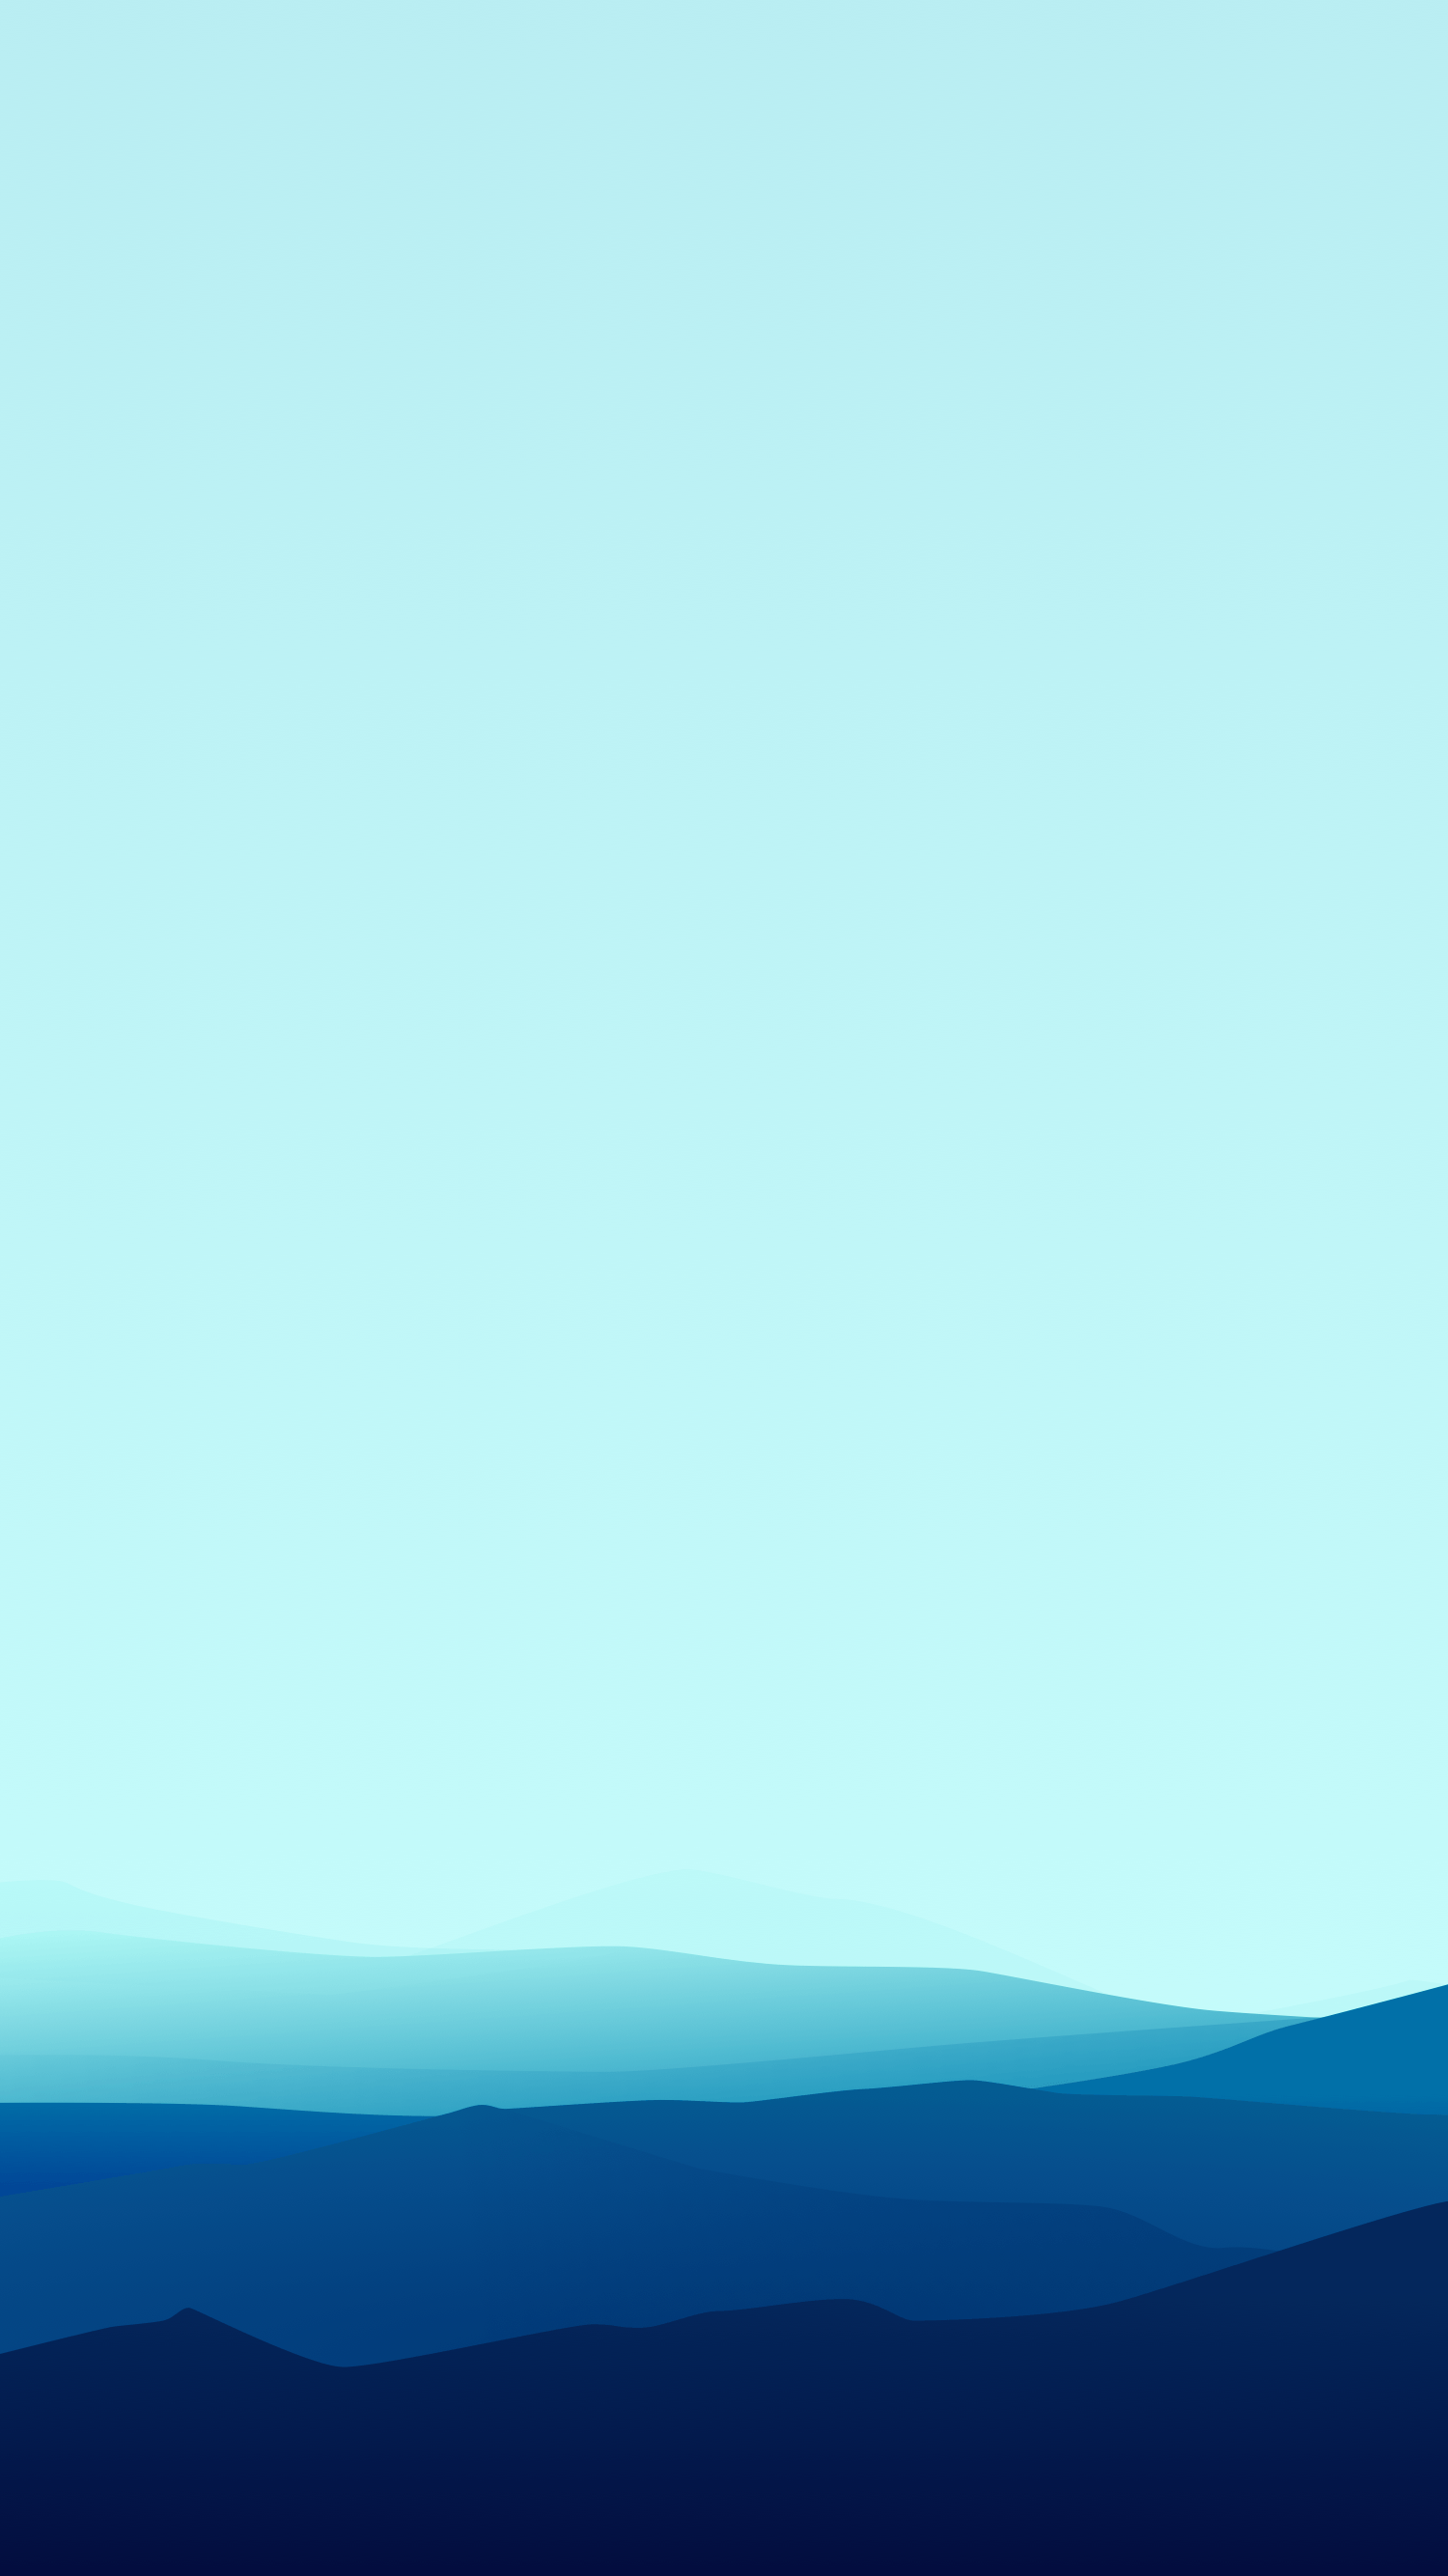 Wallpaper of the week: mountains